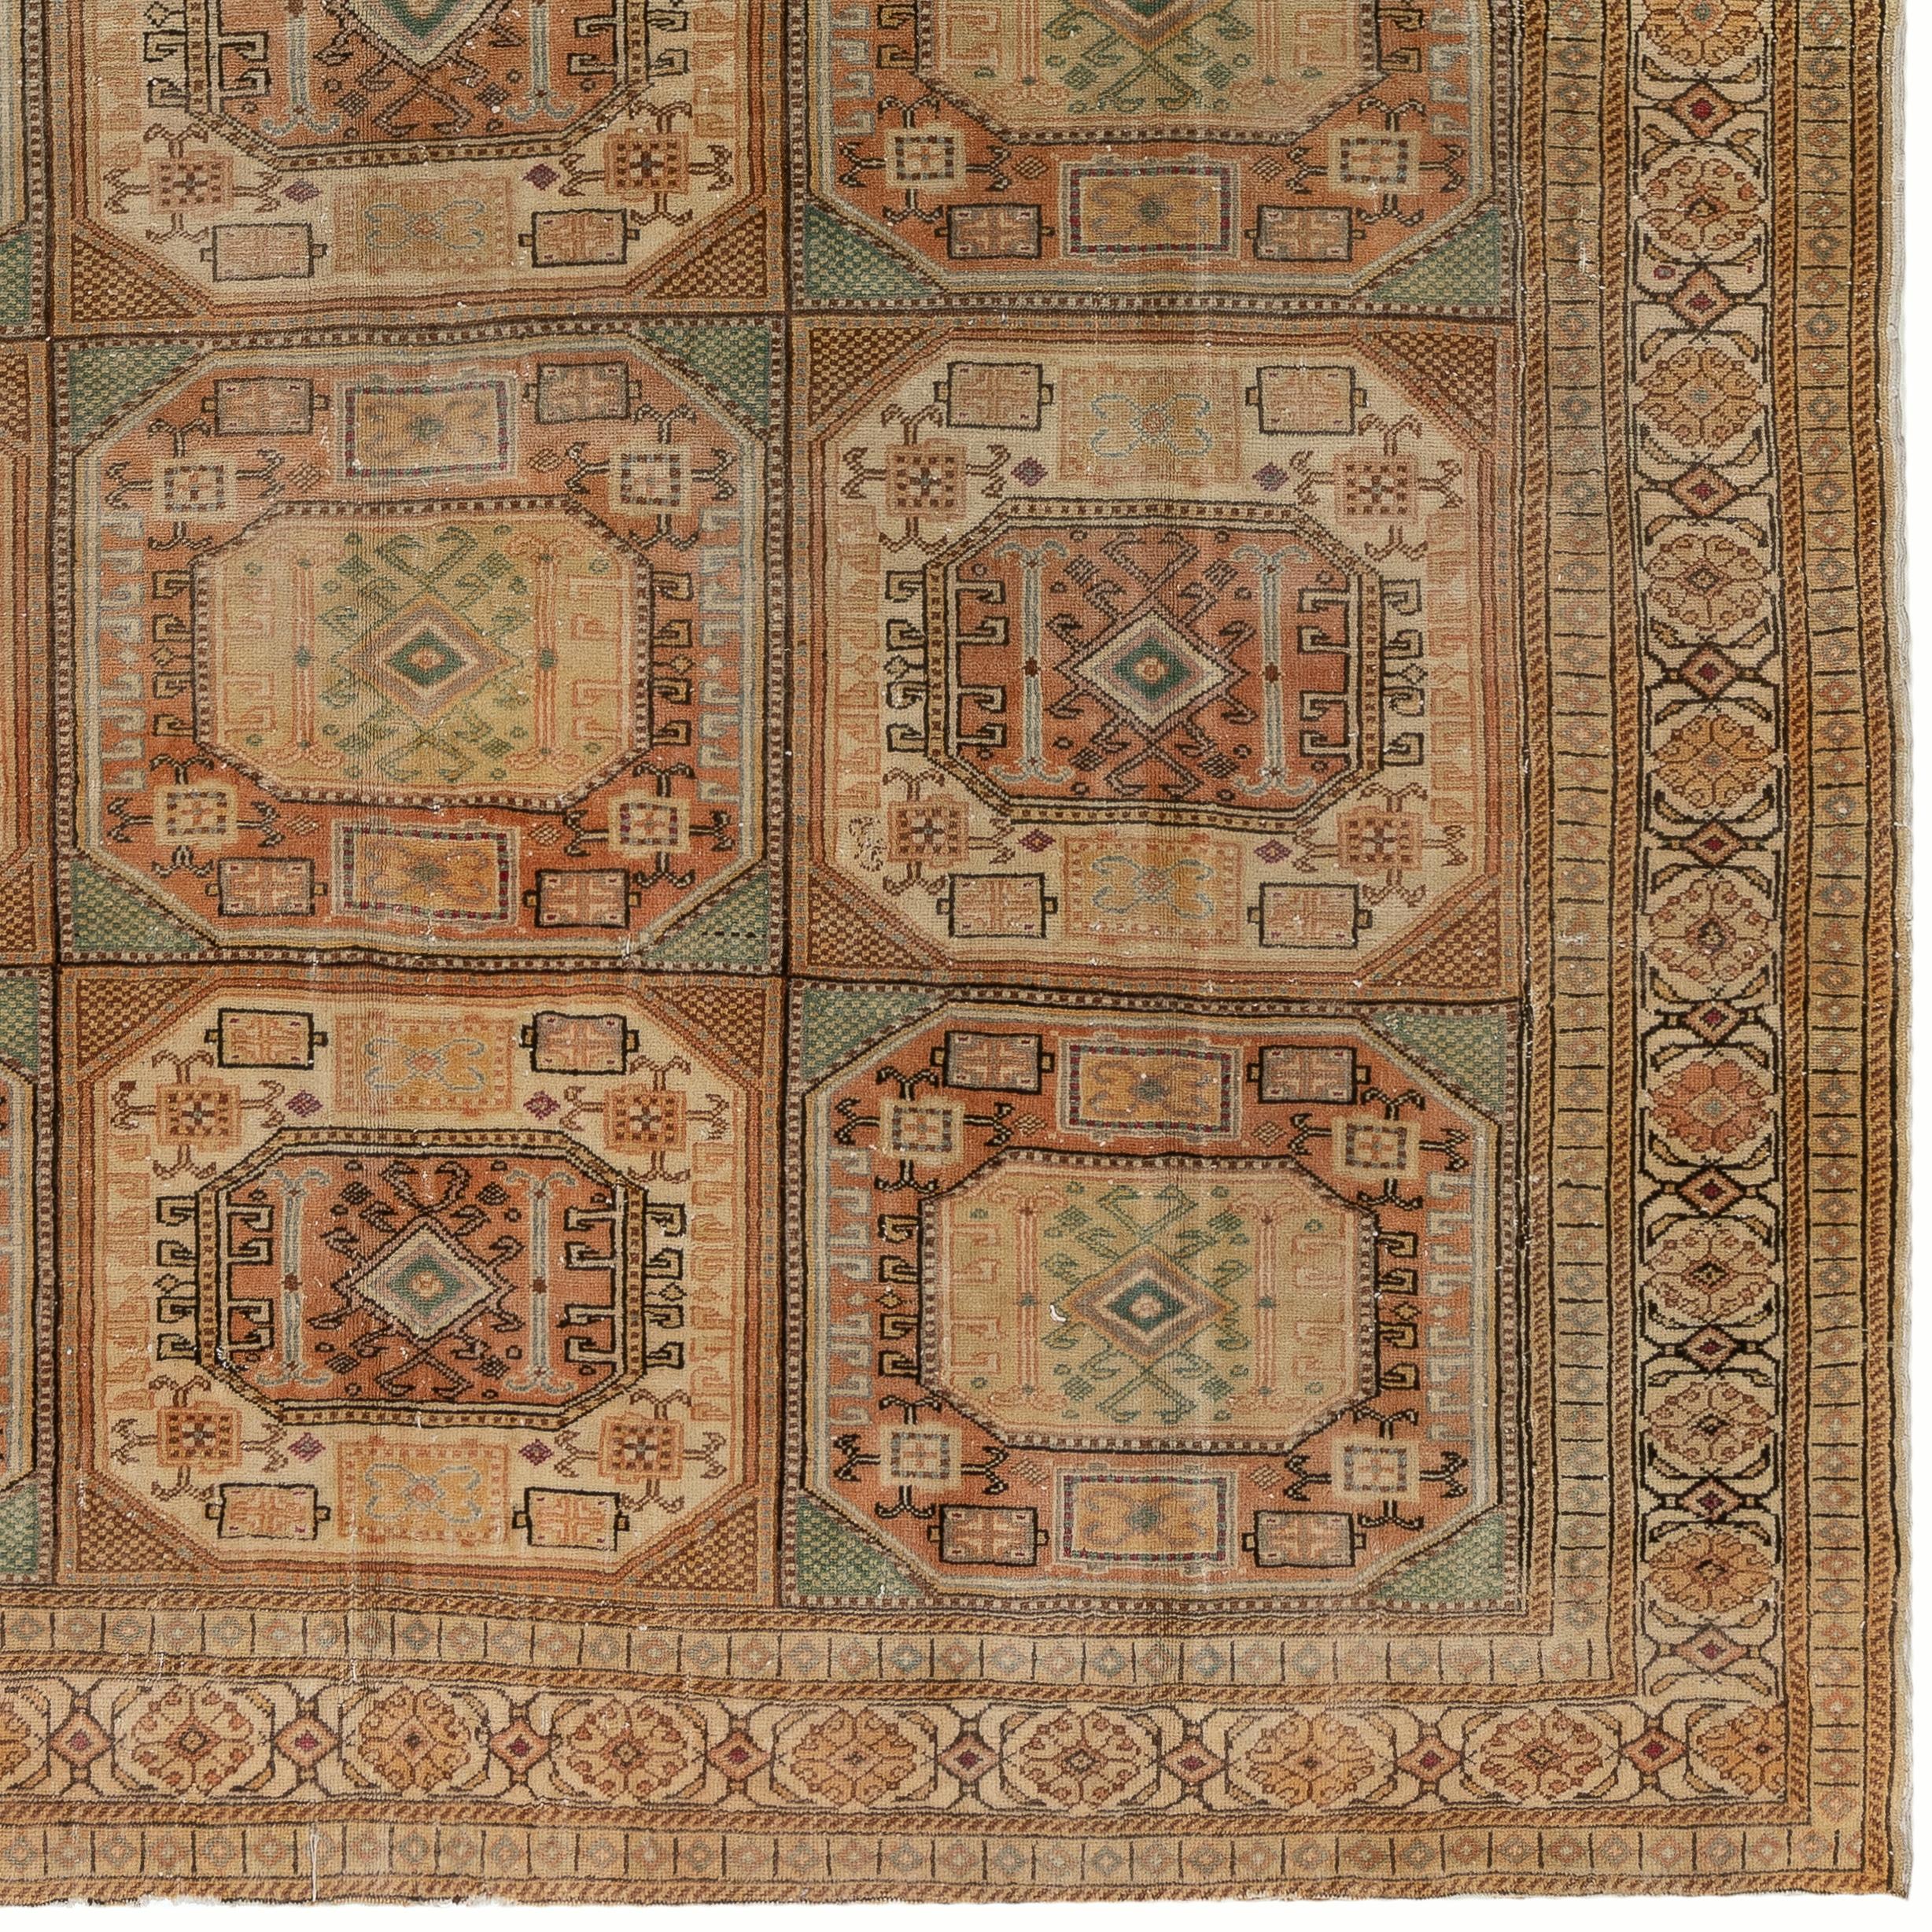 Hand-Knotted 6.5x9.4 Ft Vintage Turkish Rug. Muted Colors, Geometric Design & Tribal Patterns For Sale